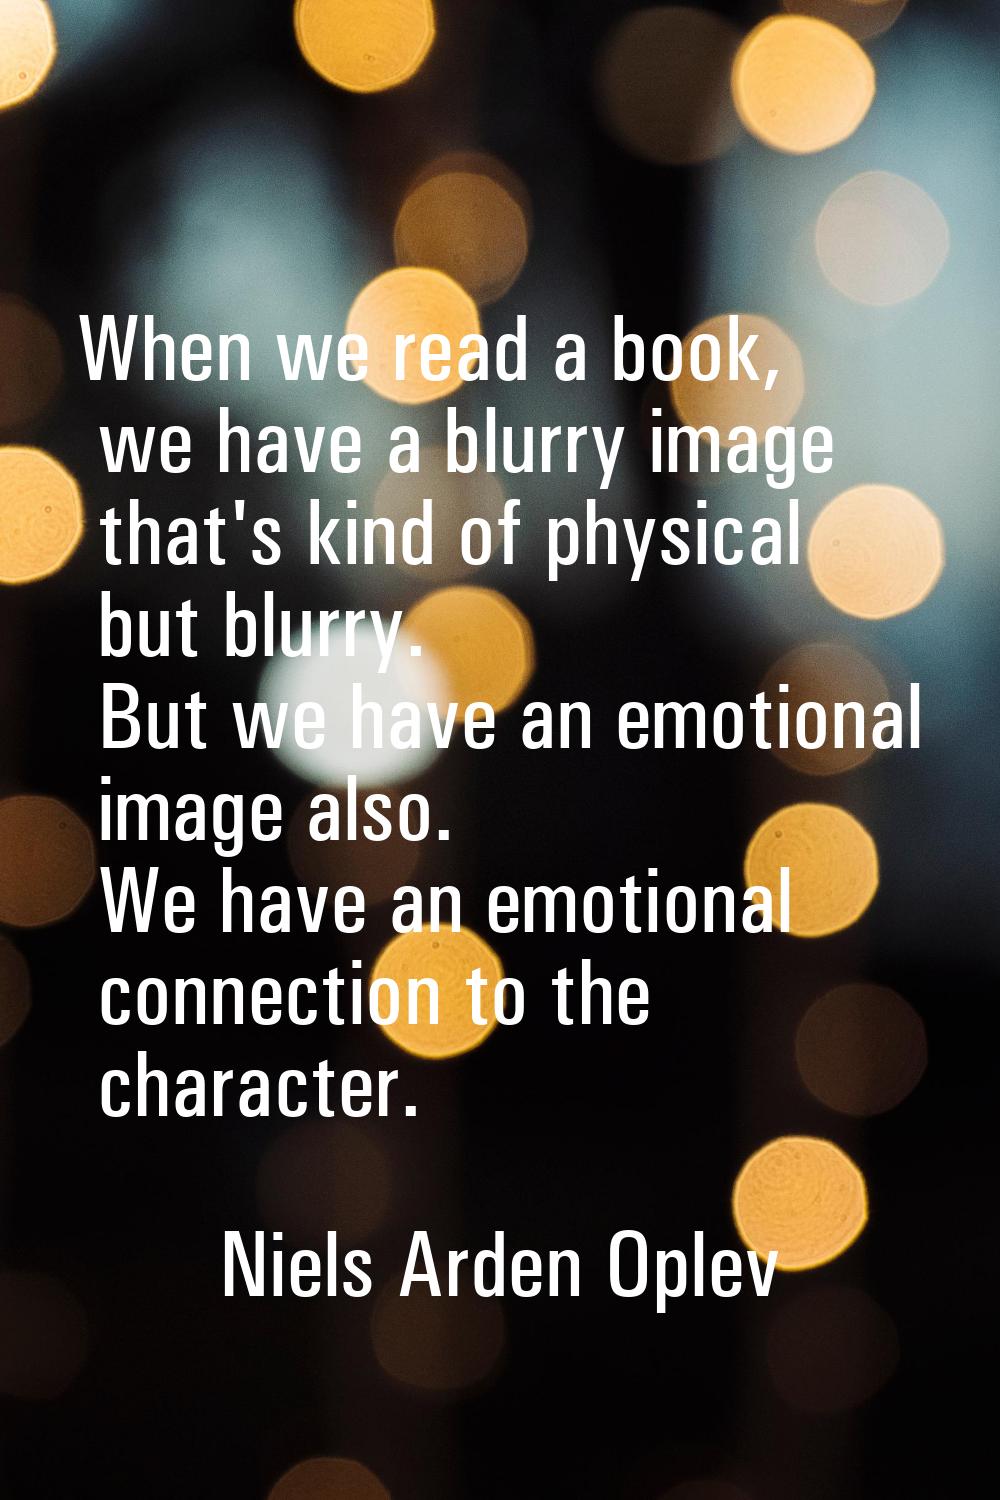 When we read a book, we have a blurry image that's kind of physical but blurry. But we have an emot